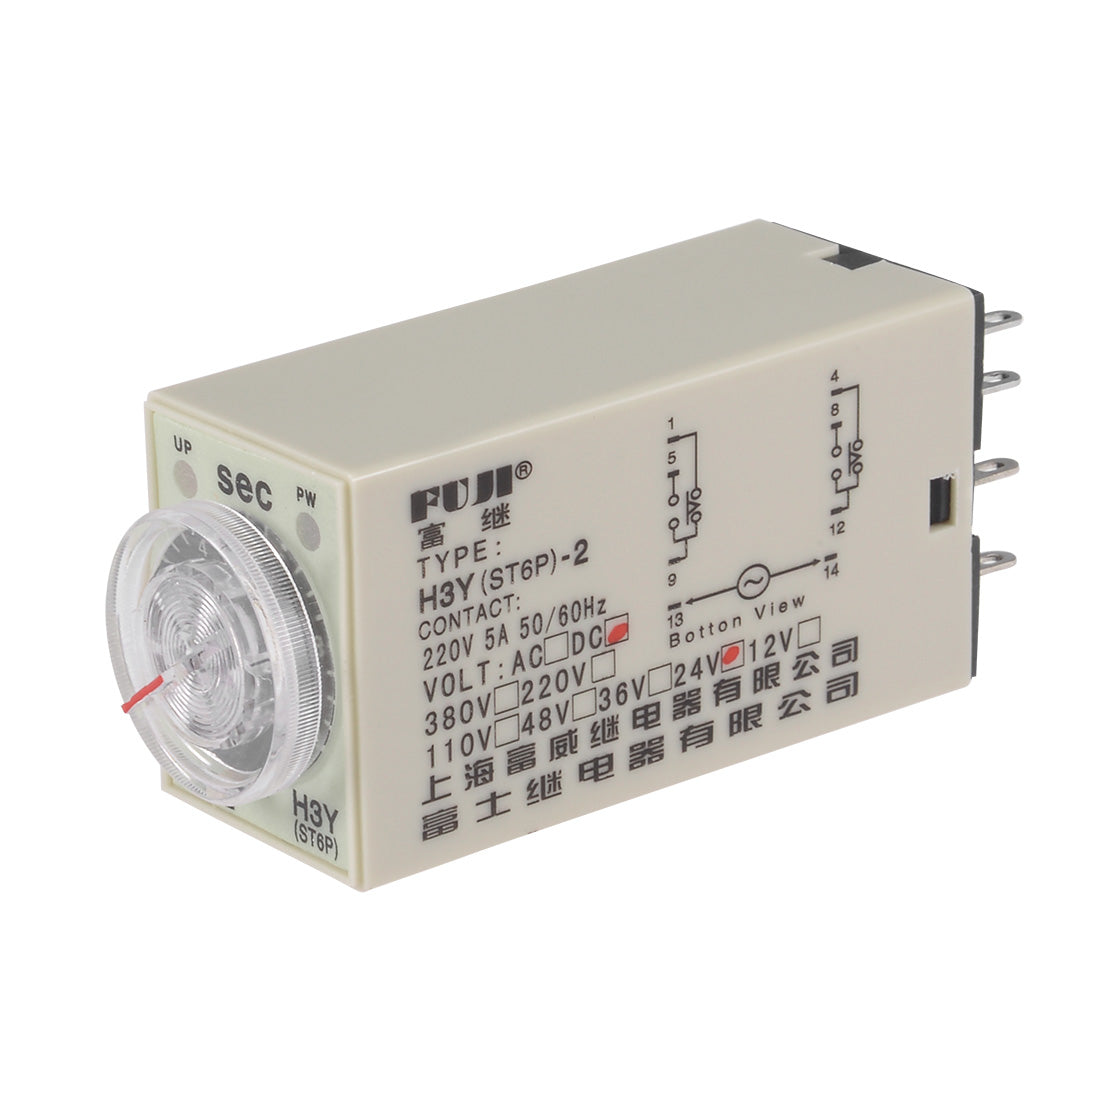 uxcell Uxcell 24VDC 10S 8 Terminals Range Adjustable Delay Timer Time Relay H3Y(ST6P)-2